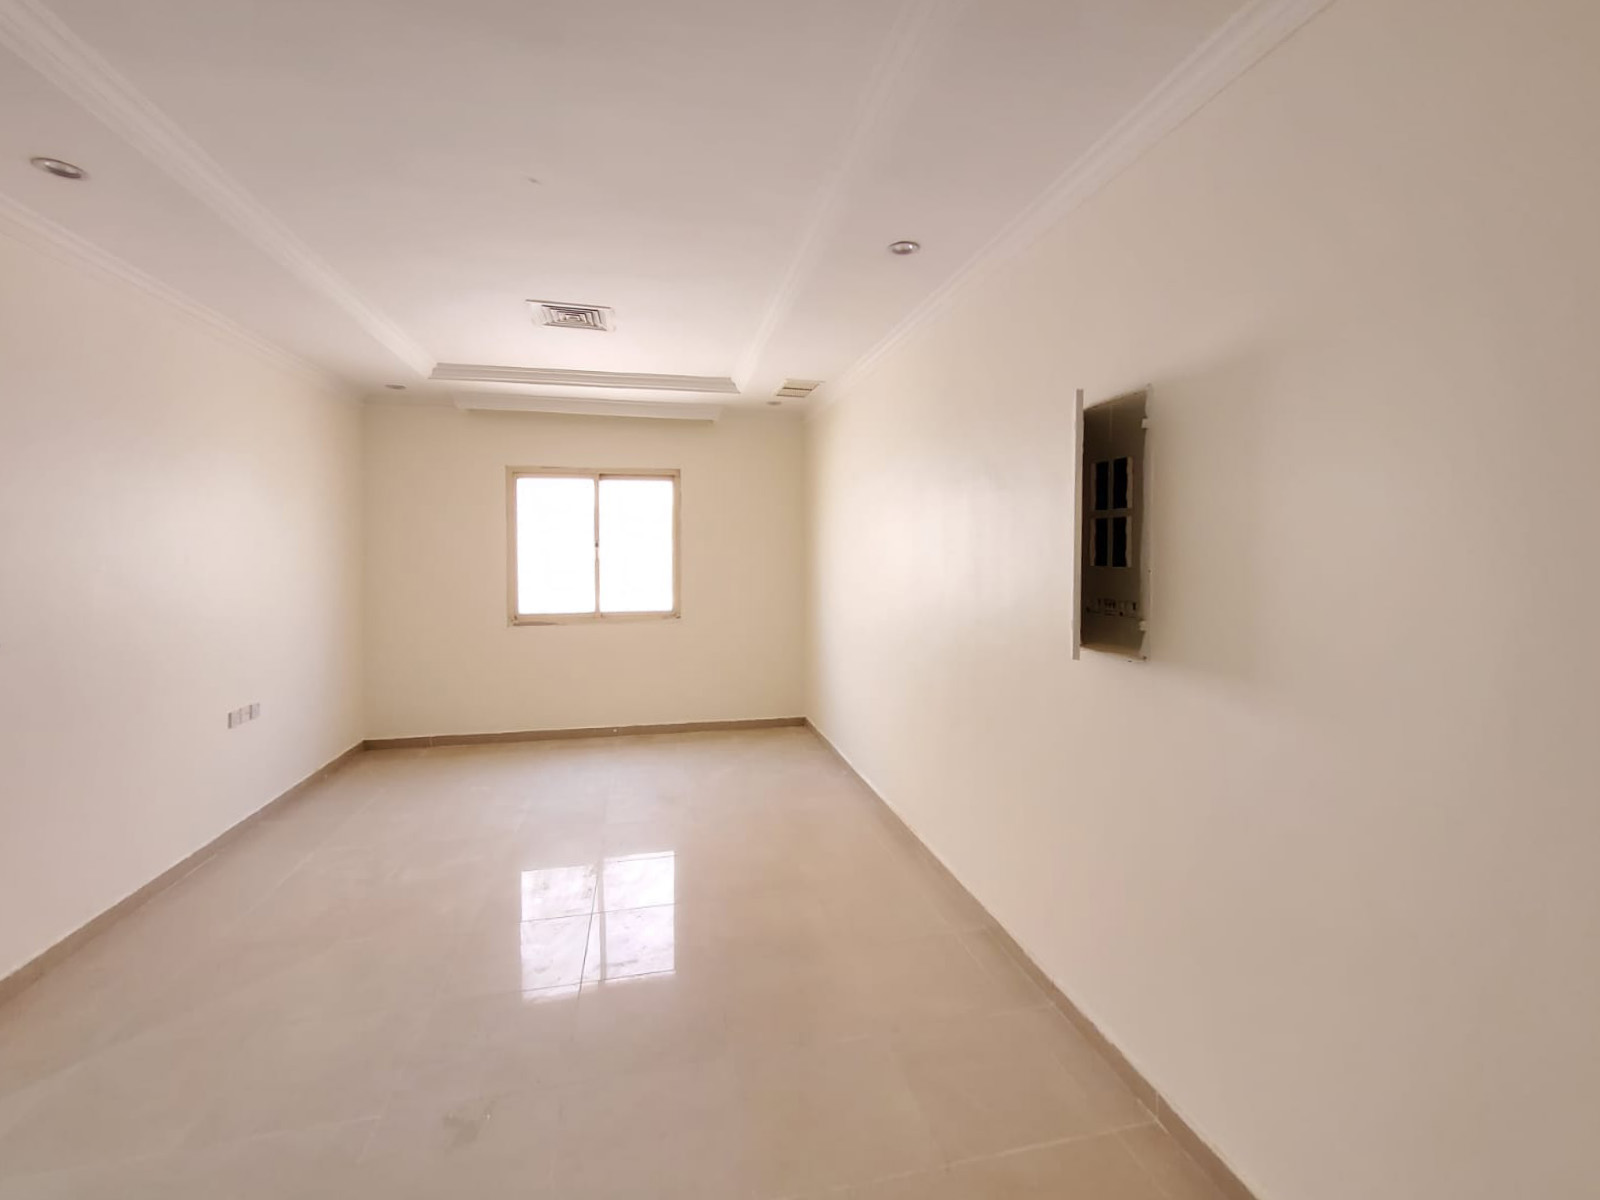 Salwa – older, rennovated, two master bedroom apartment